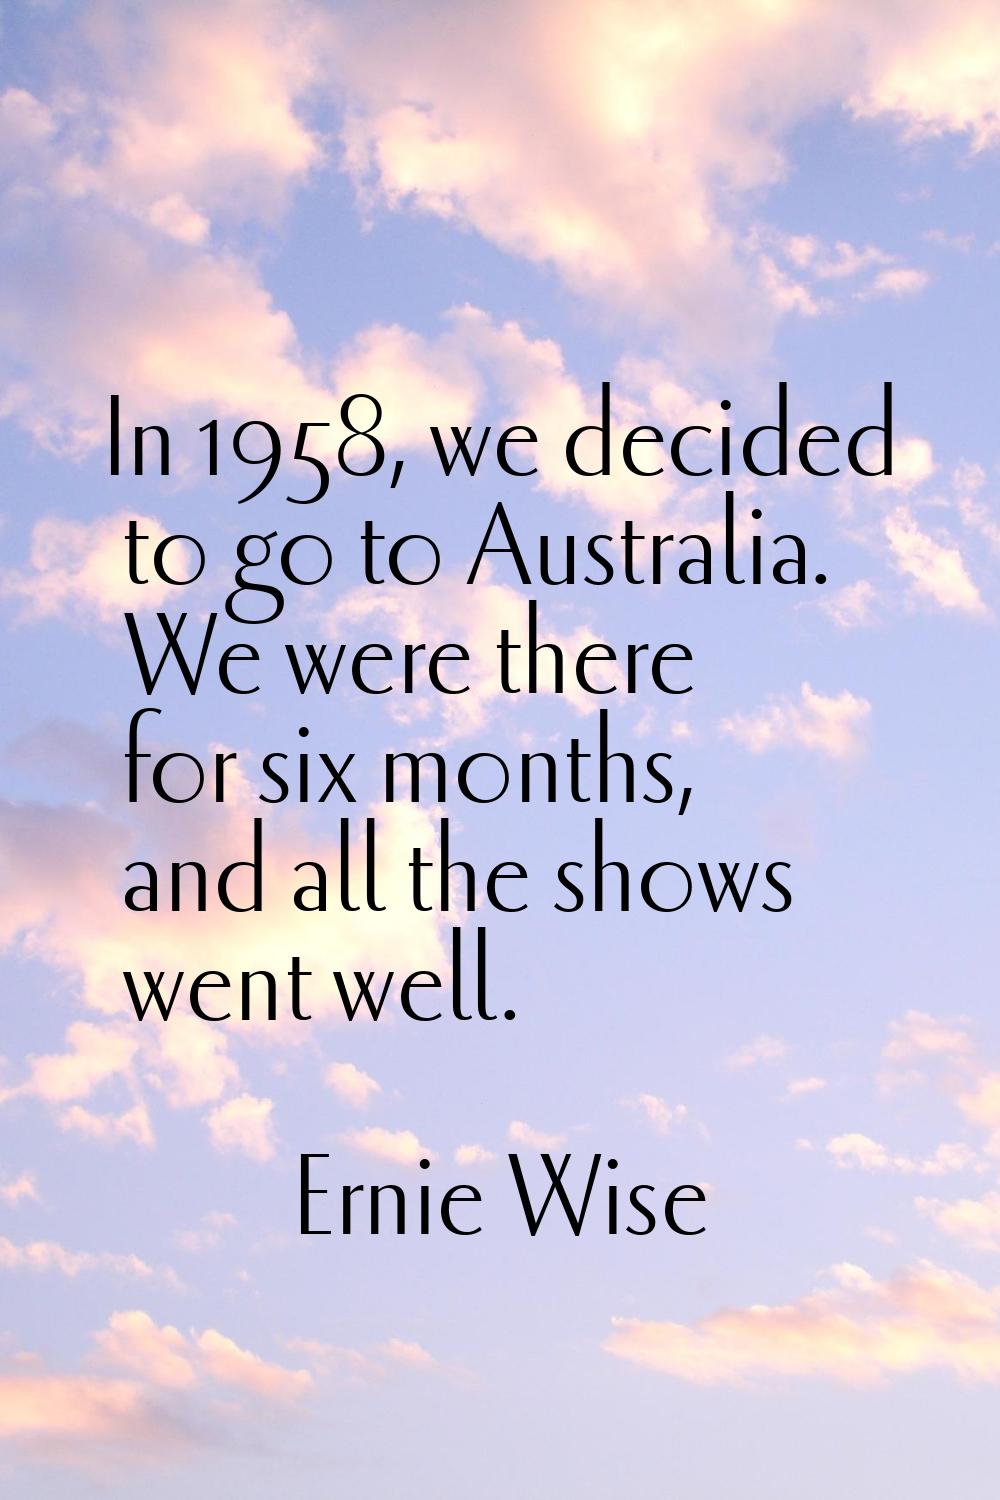 In 1958, we decided to go to Australia. We were there for six months, and all the shows went well.